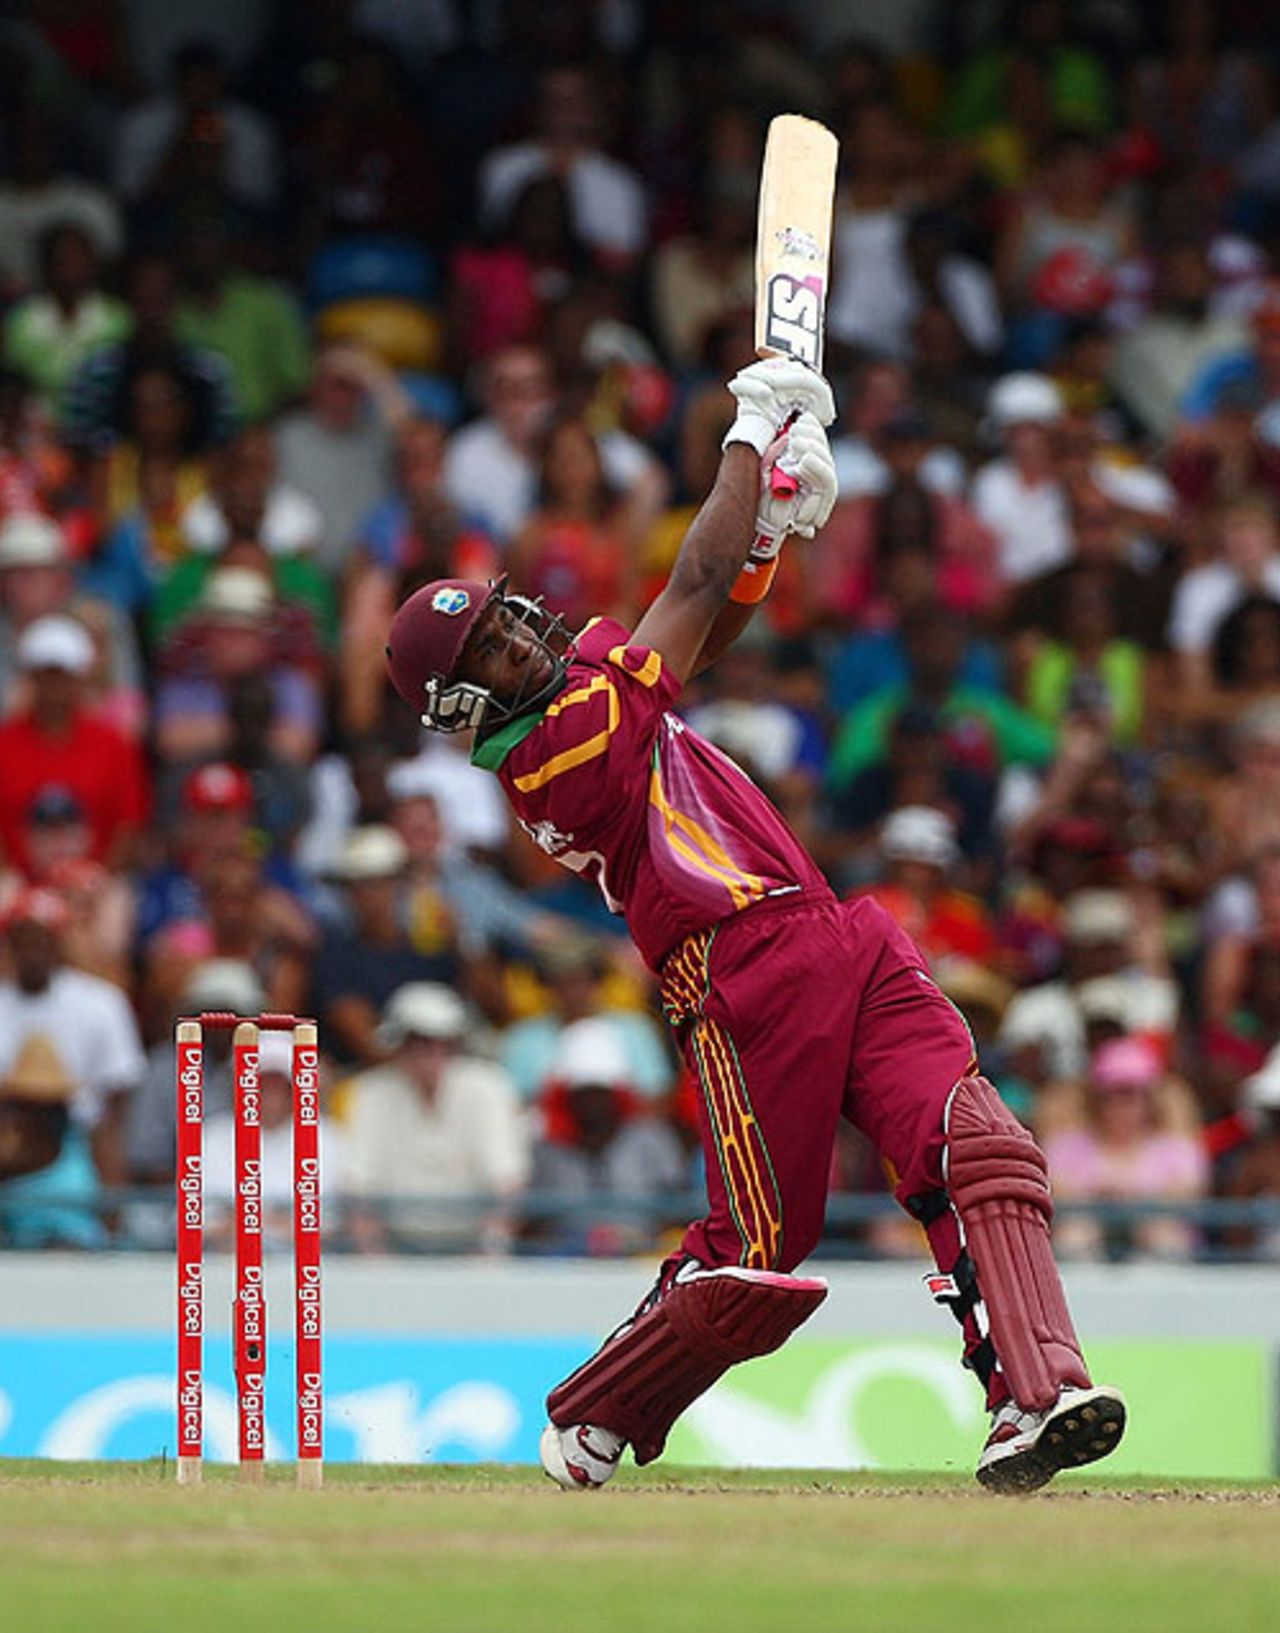 Dwayne Bravo climbs onto the offensive during his 69 from 72 balls, West Indies v England, 4th ODI, Bridgetown, March 29, 2009